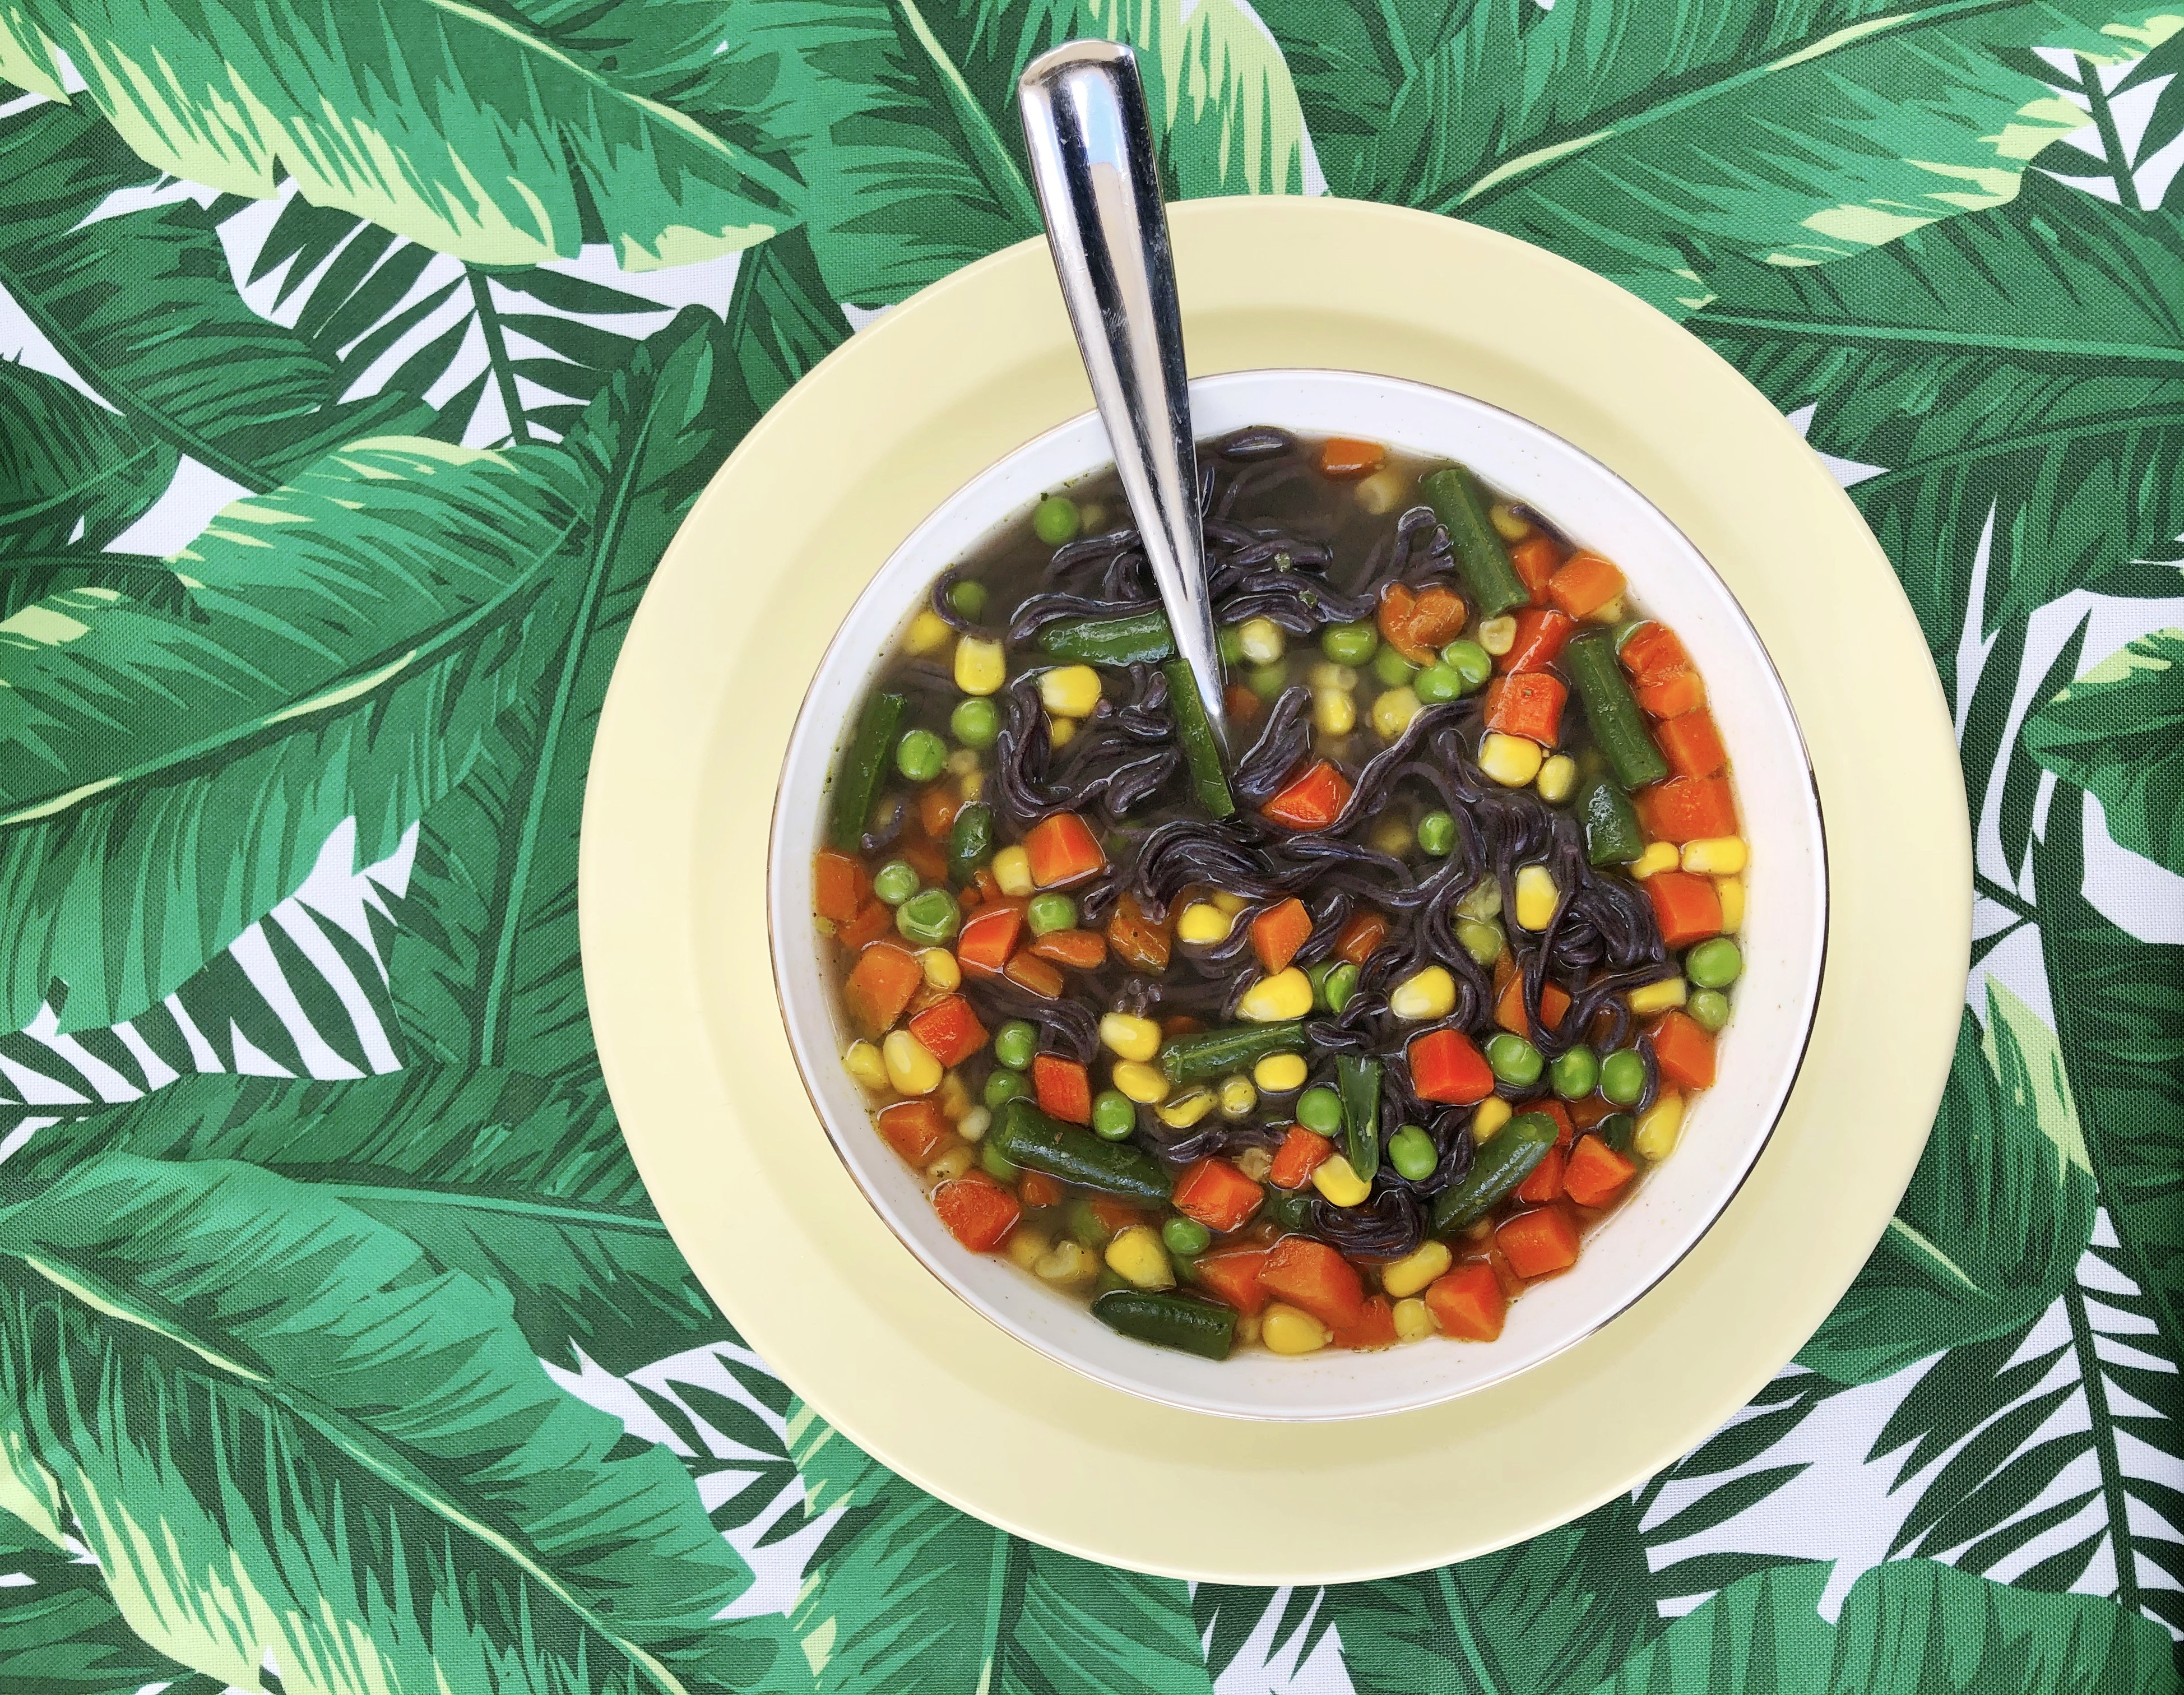 This Easy Vegan Soup Recipe Will Surely Be A Hit!